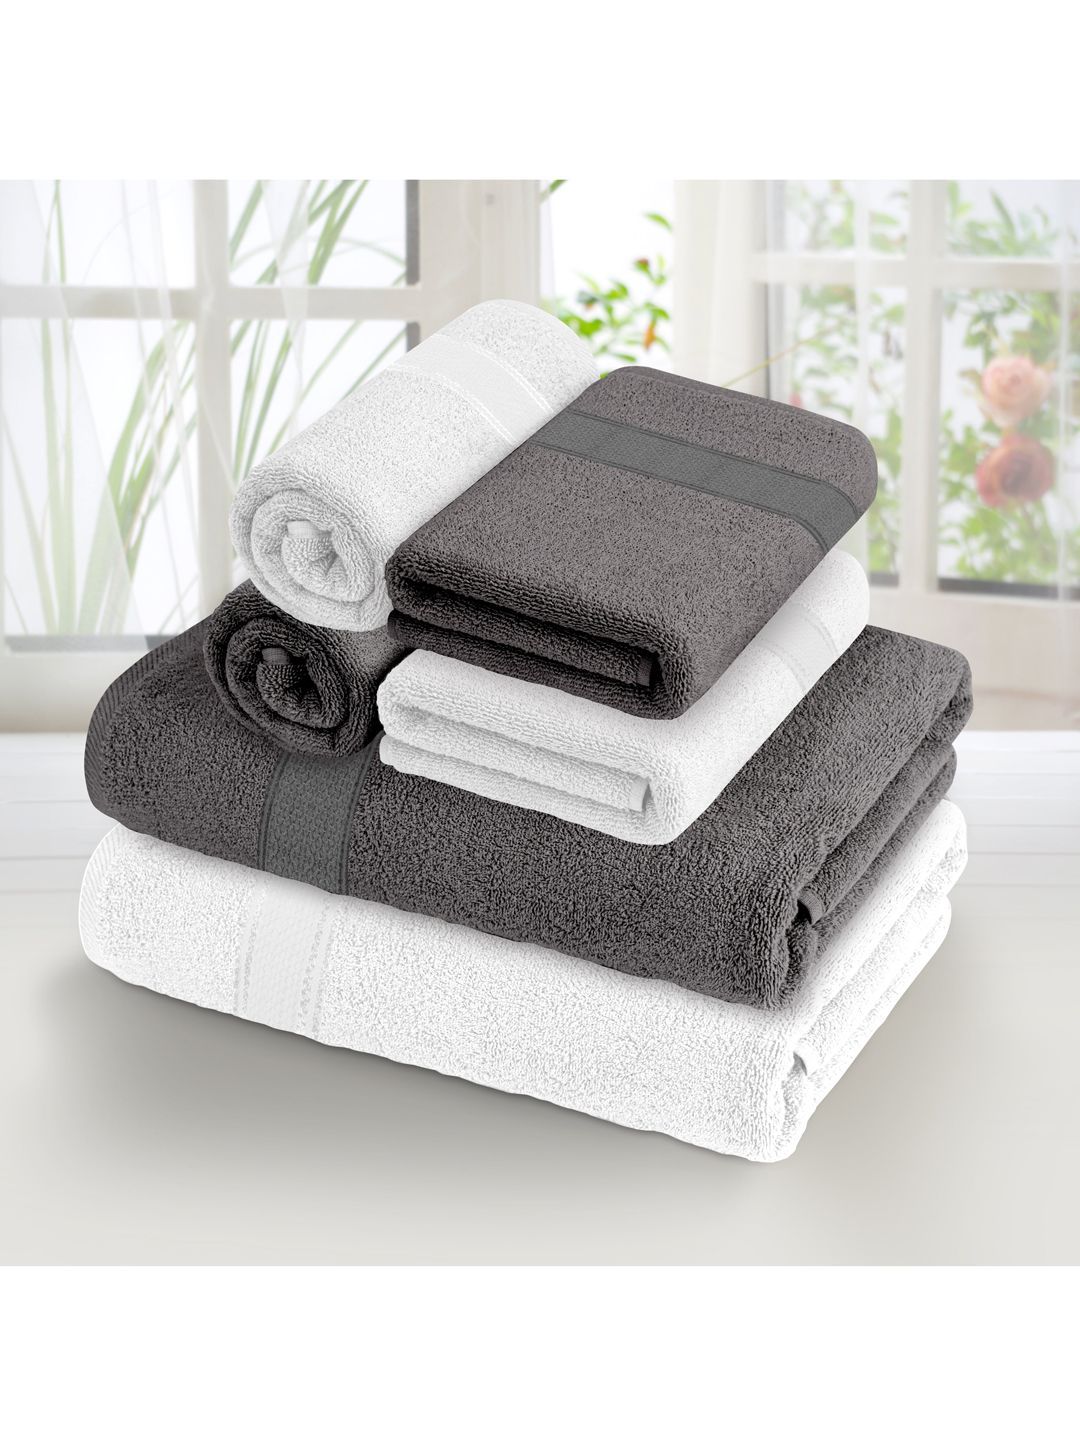 Athome by Nilkamal set of 6 White & Charcoal grey solid 370 GSM cotton Bath Towels Price in India